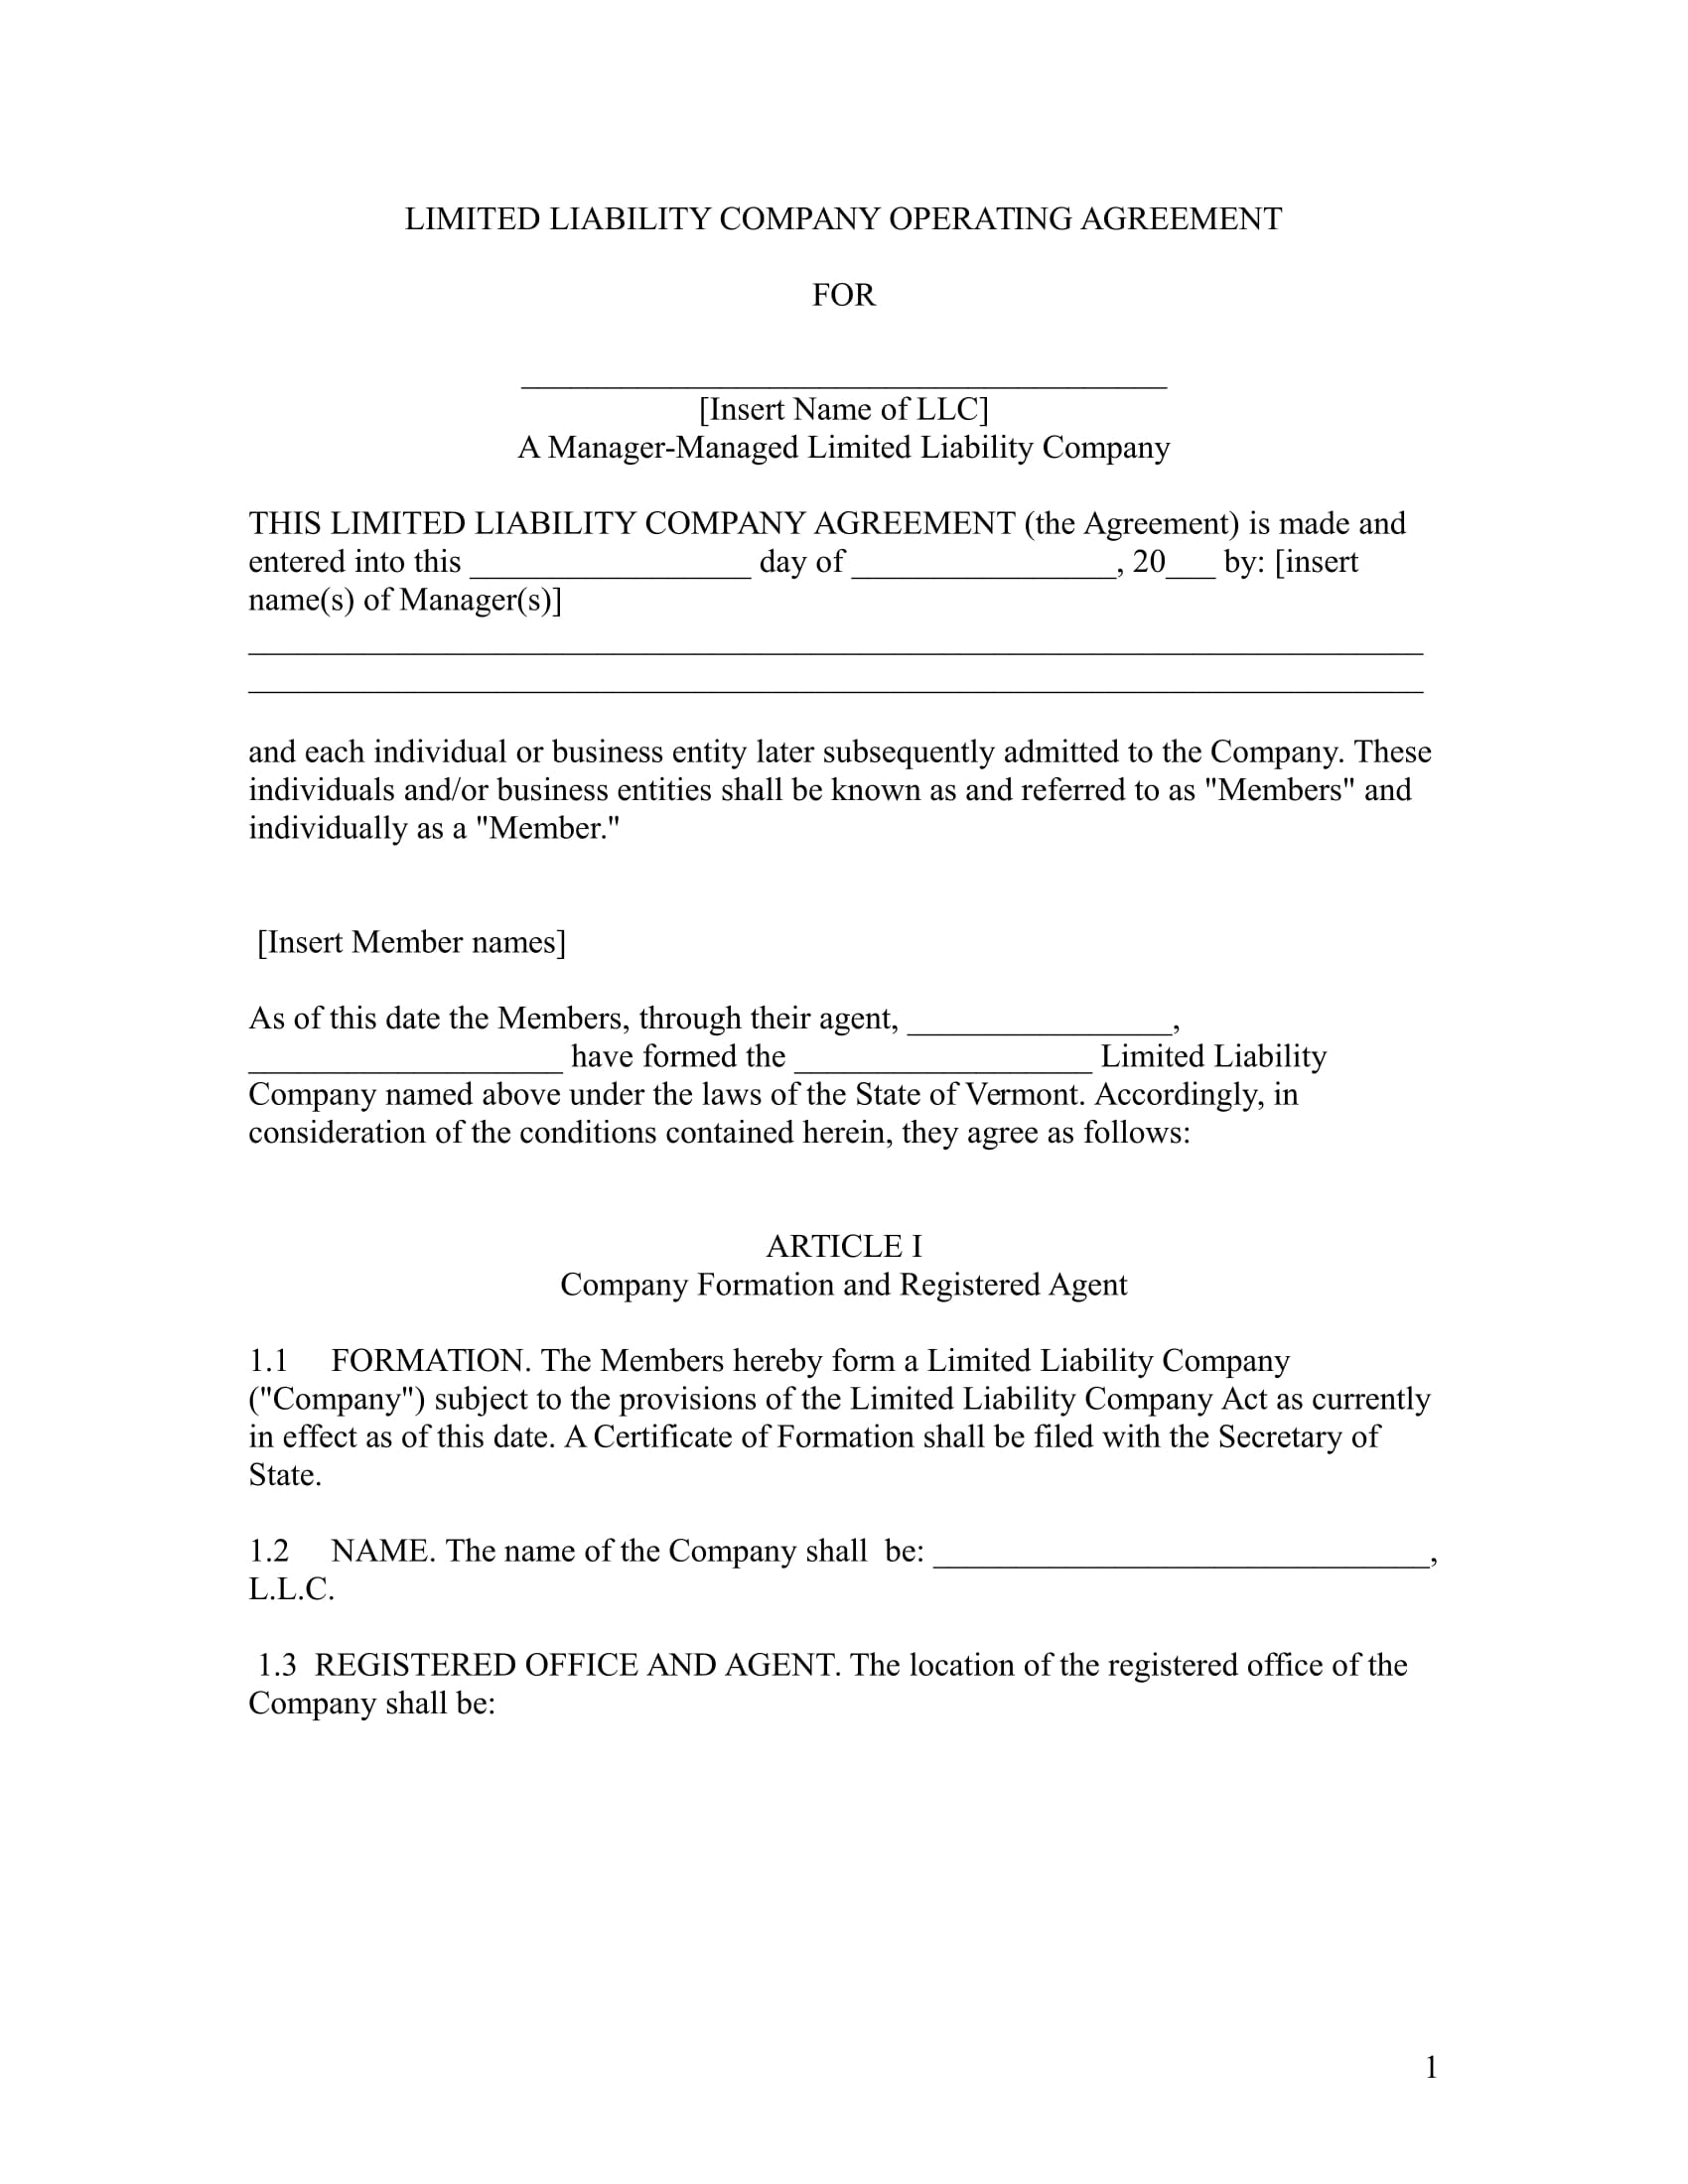 limited liability company operating agreement example